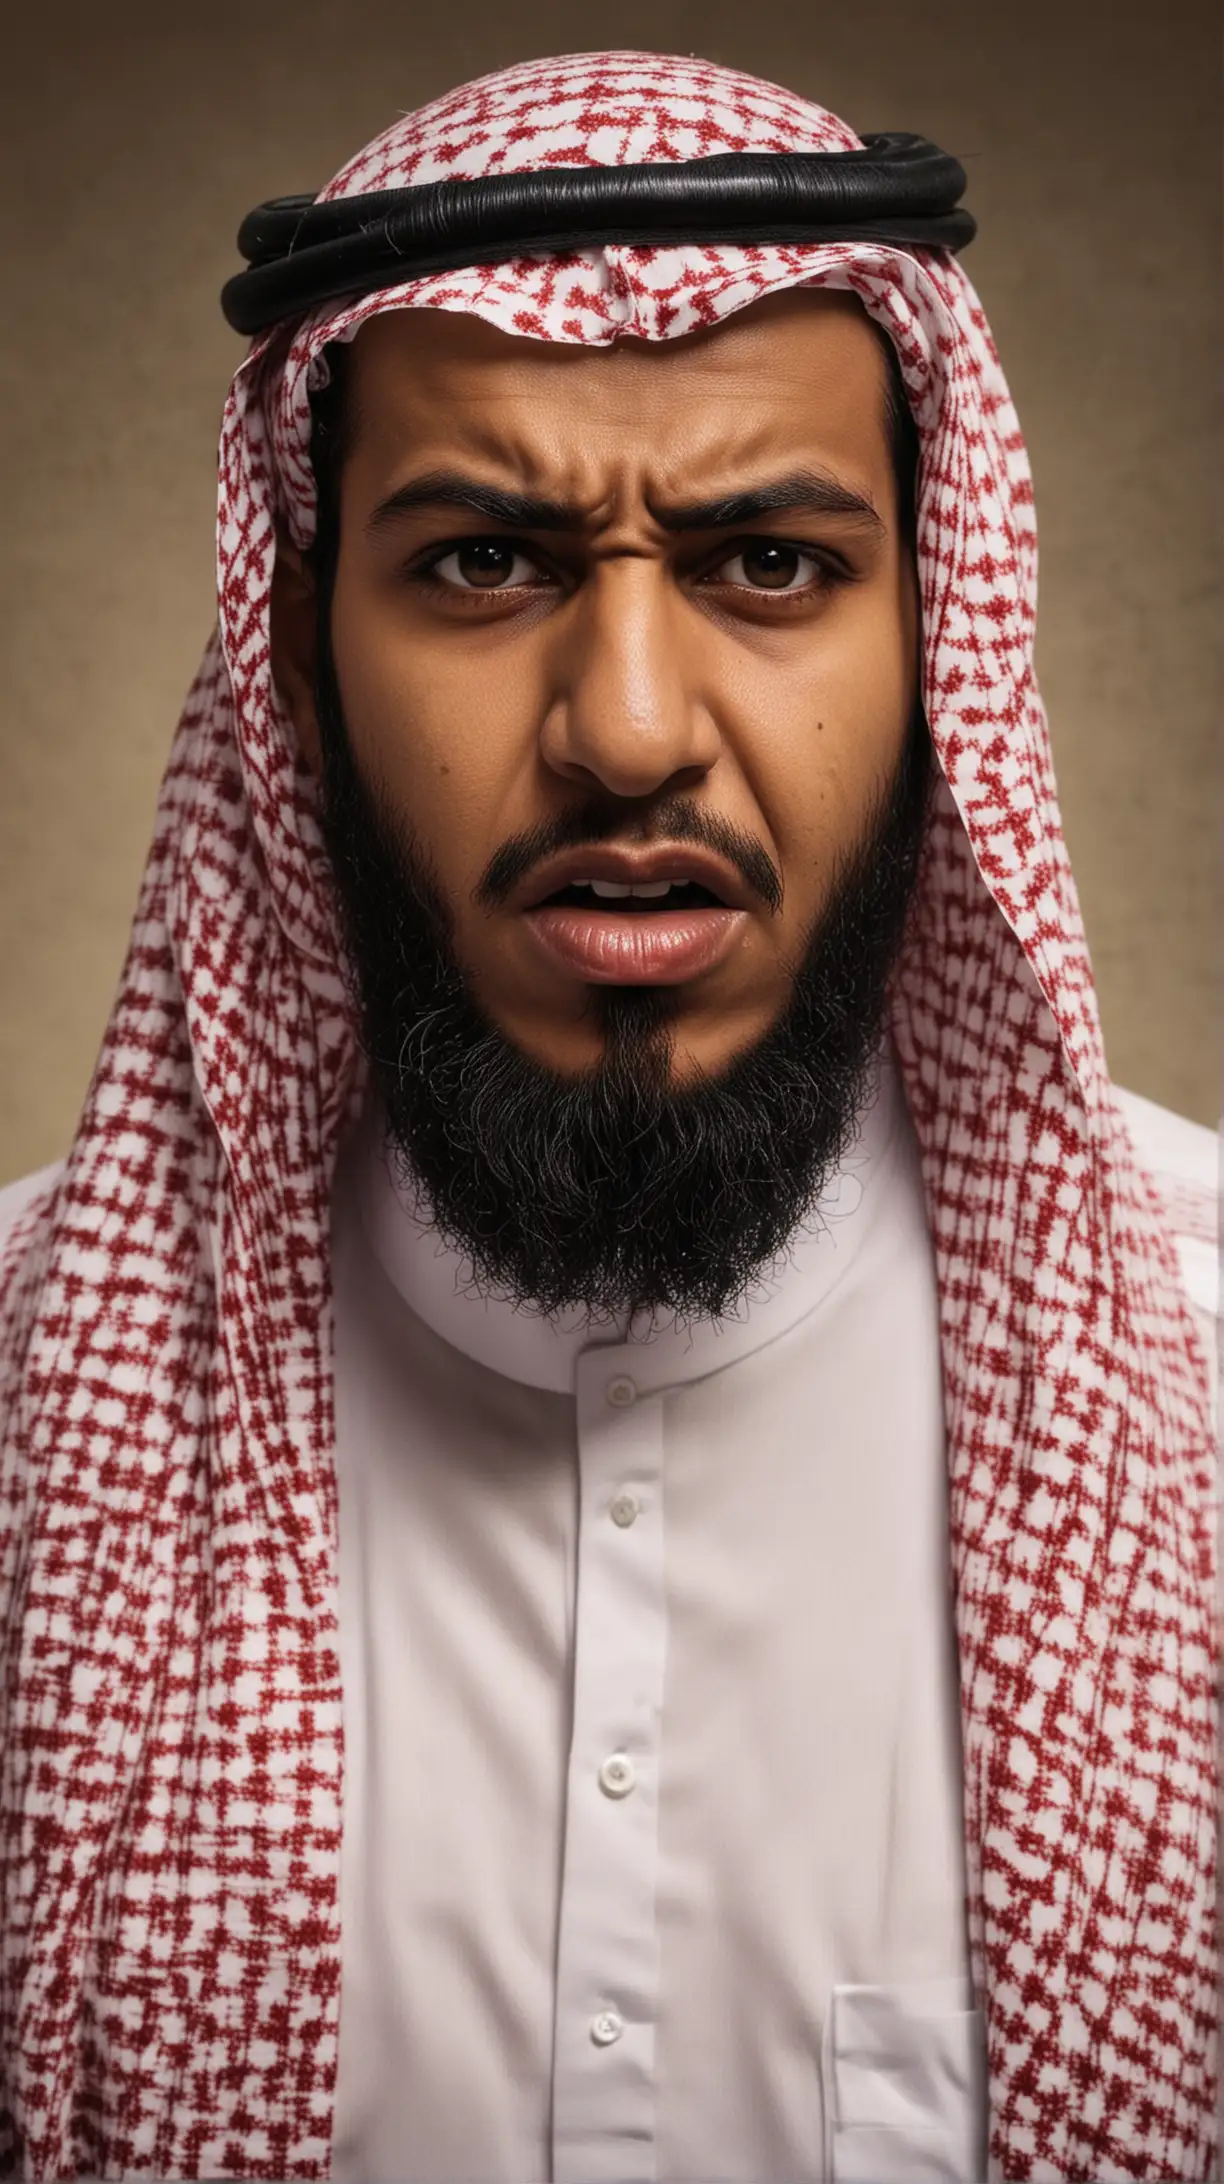 Furious Saudi Man Expresses Anger in Traditional Attire